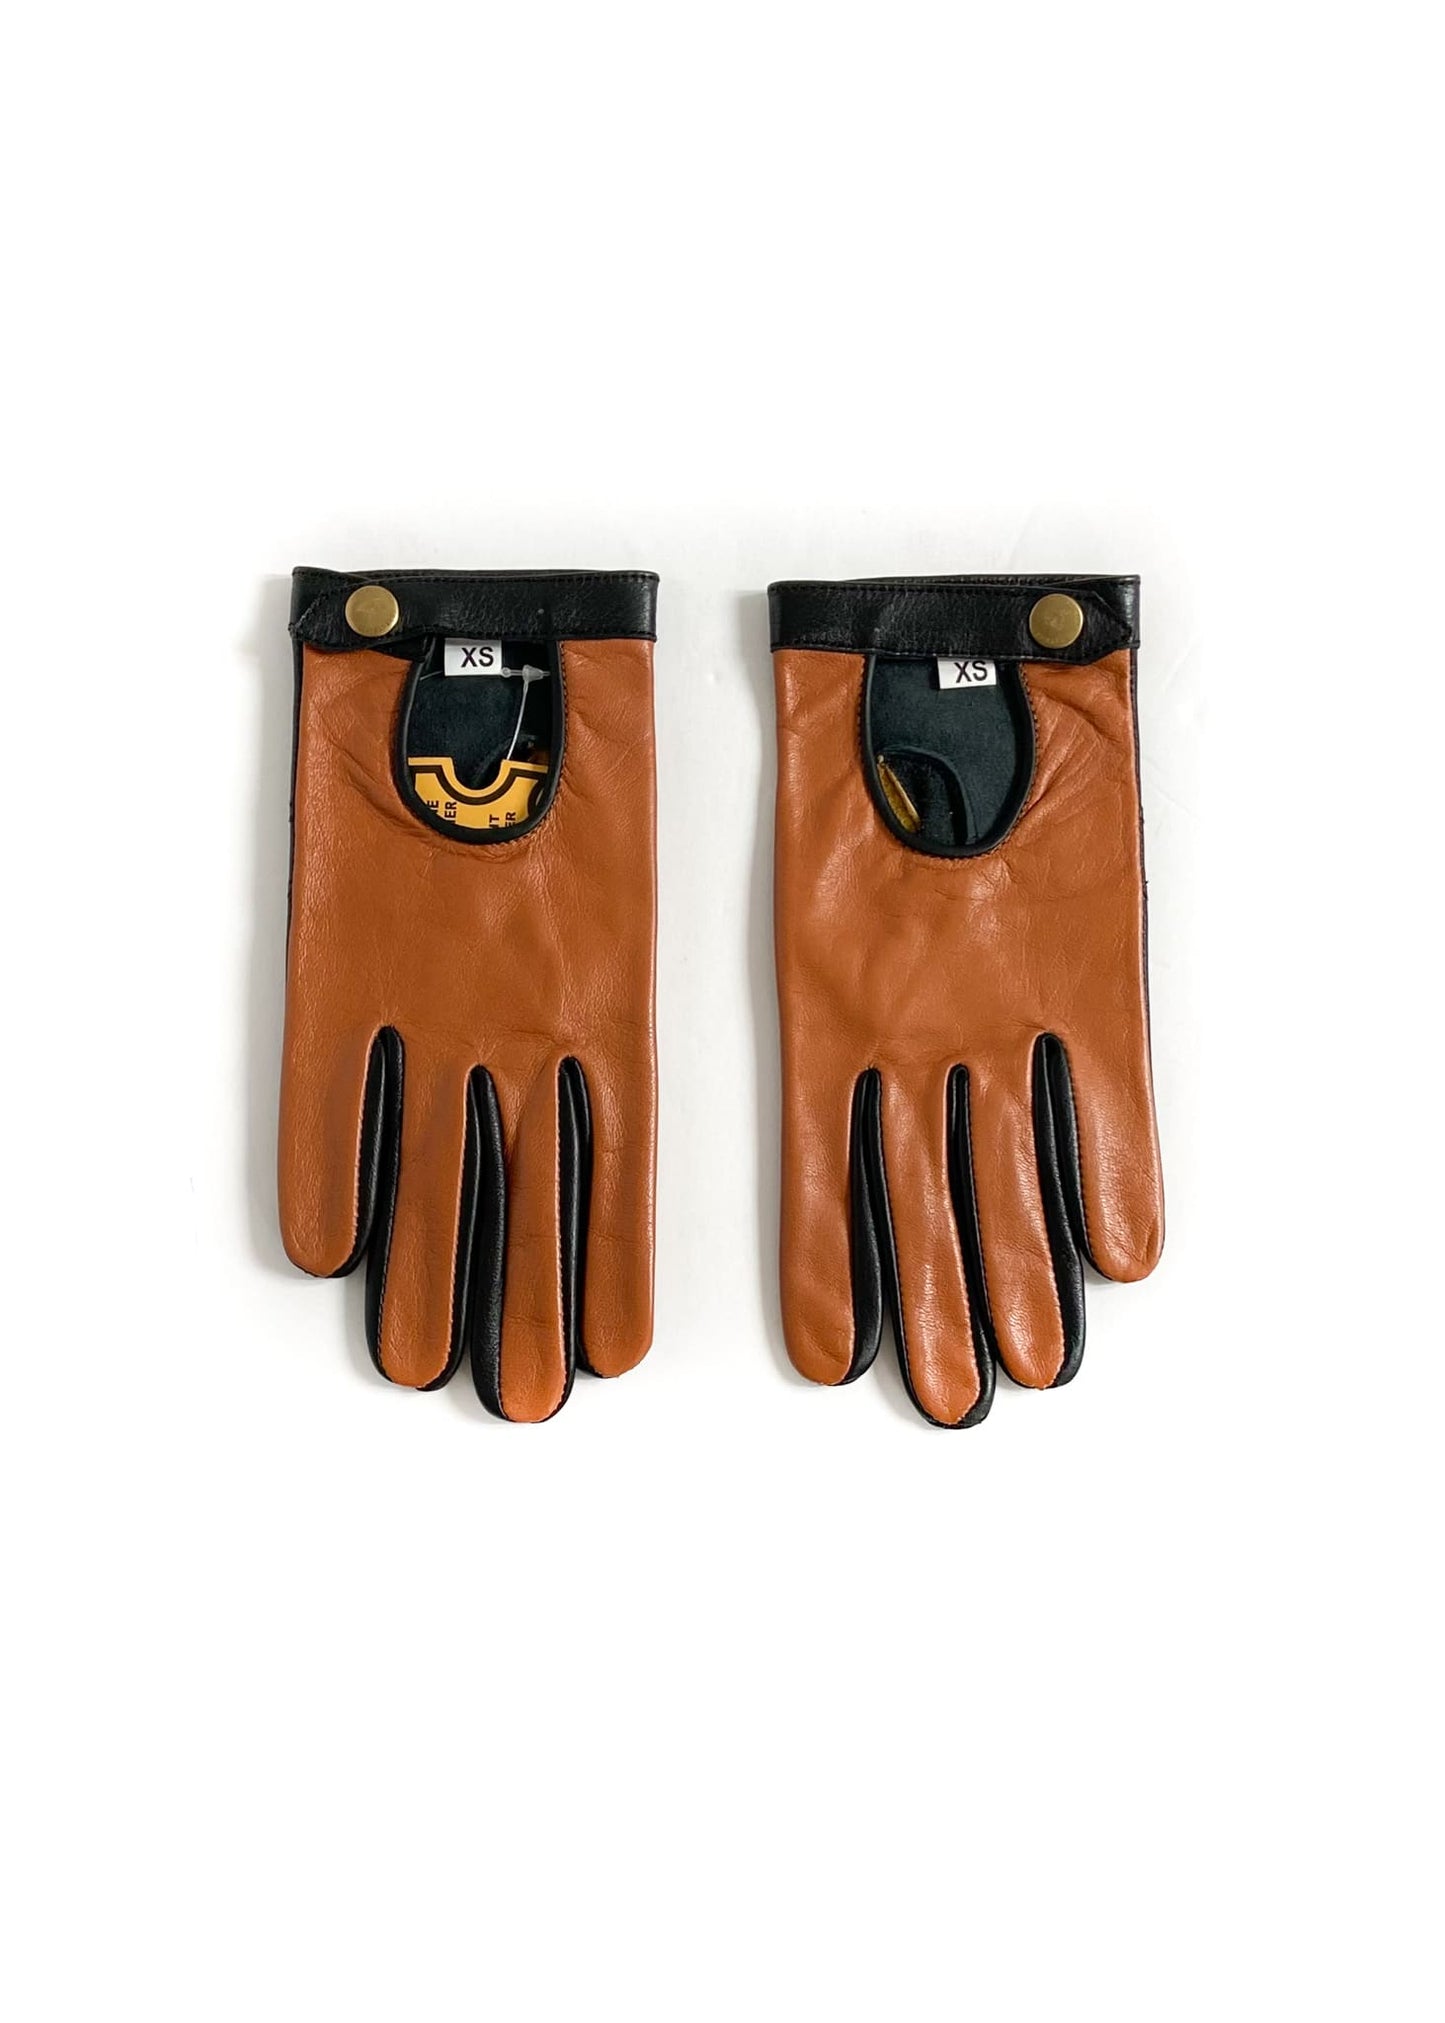 Equestriess Atelier Leather Derby Gloves - Tan - XS